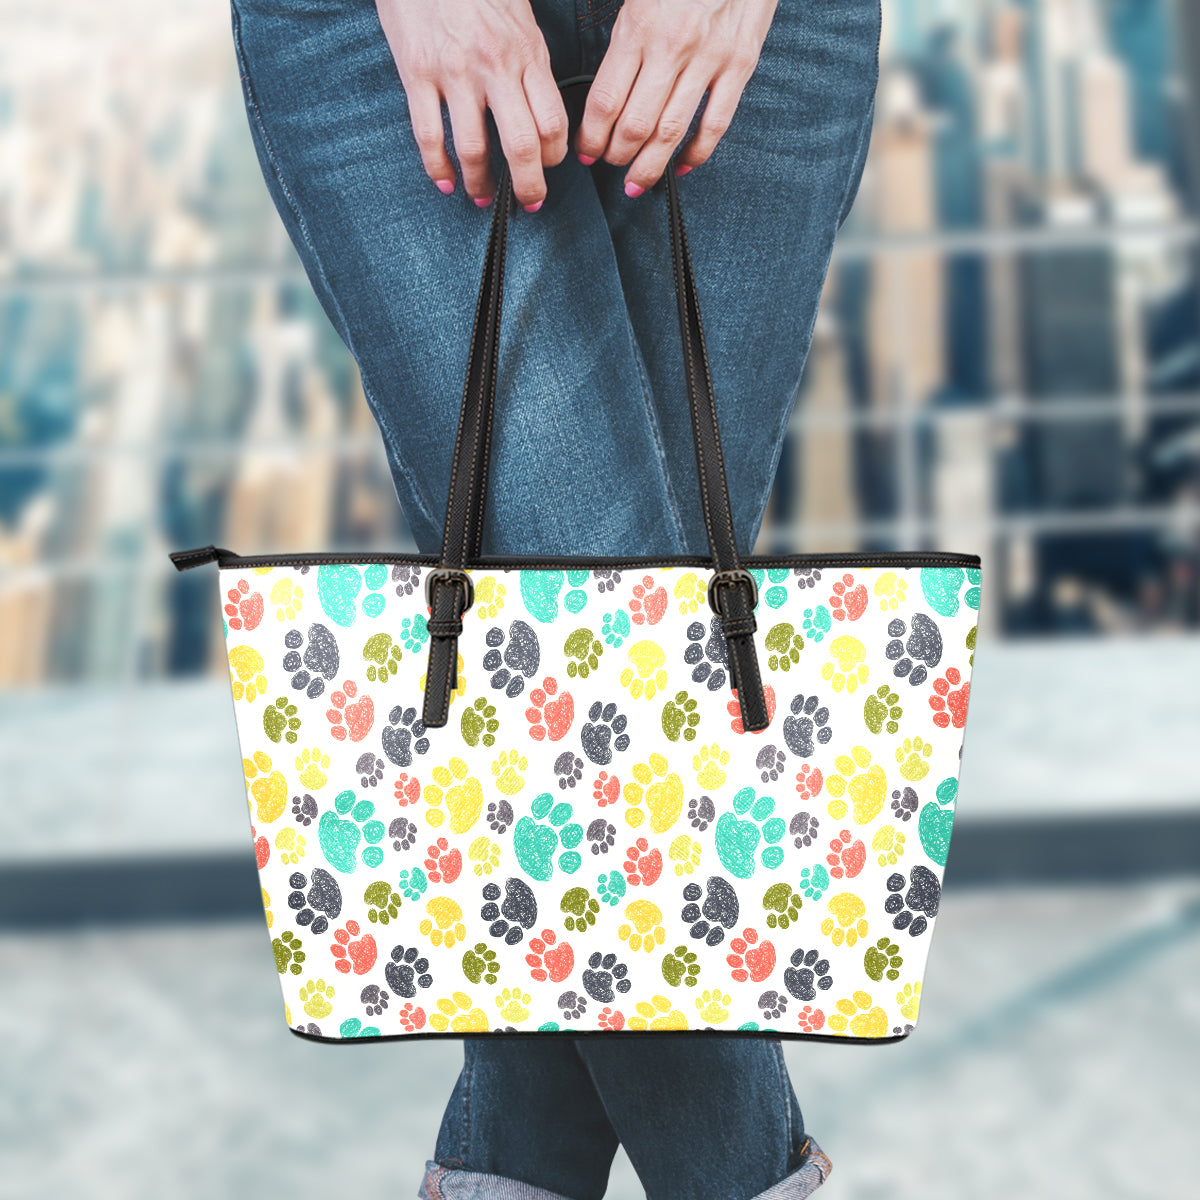 Colorful Paws Large Leather Tote Bag